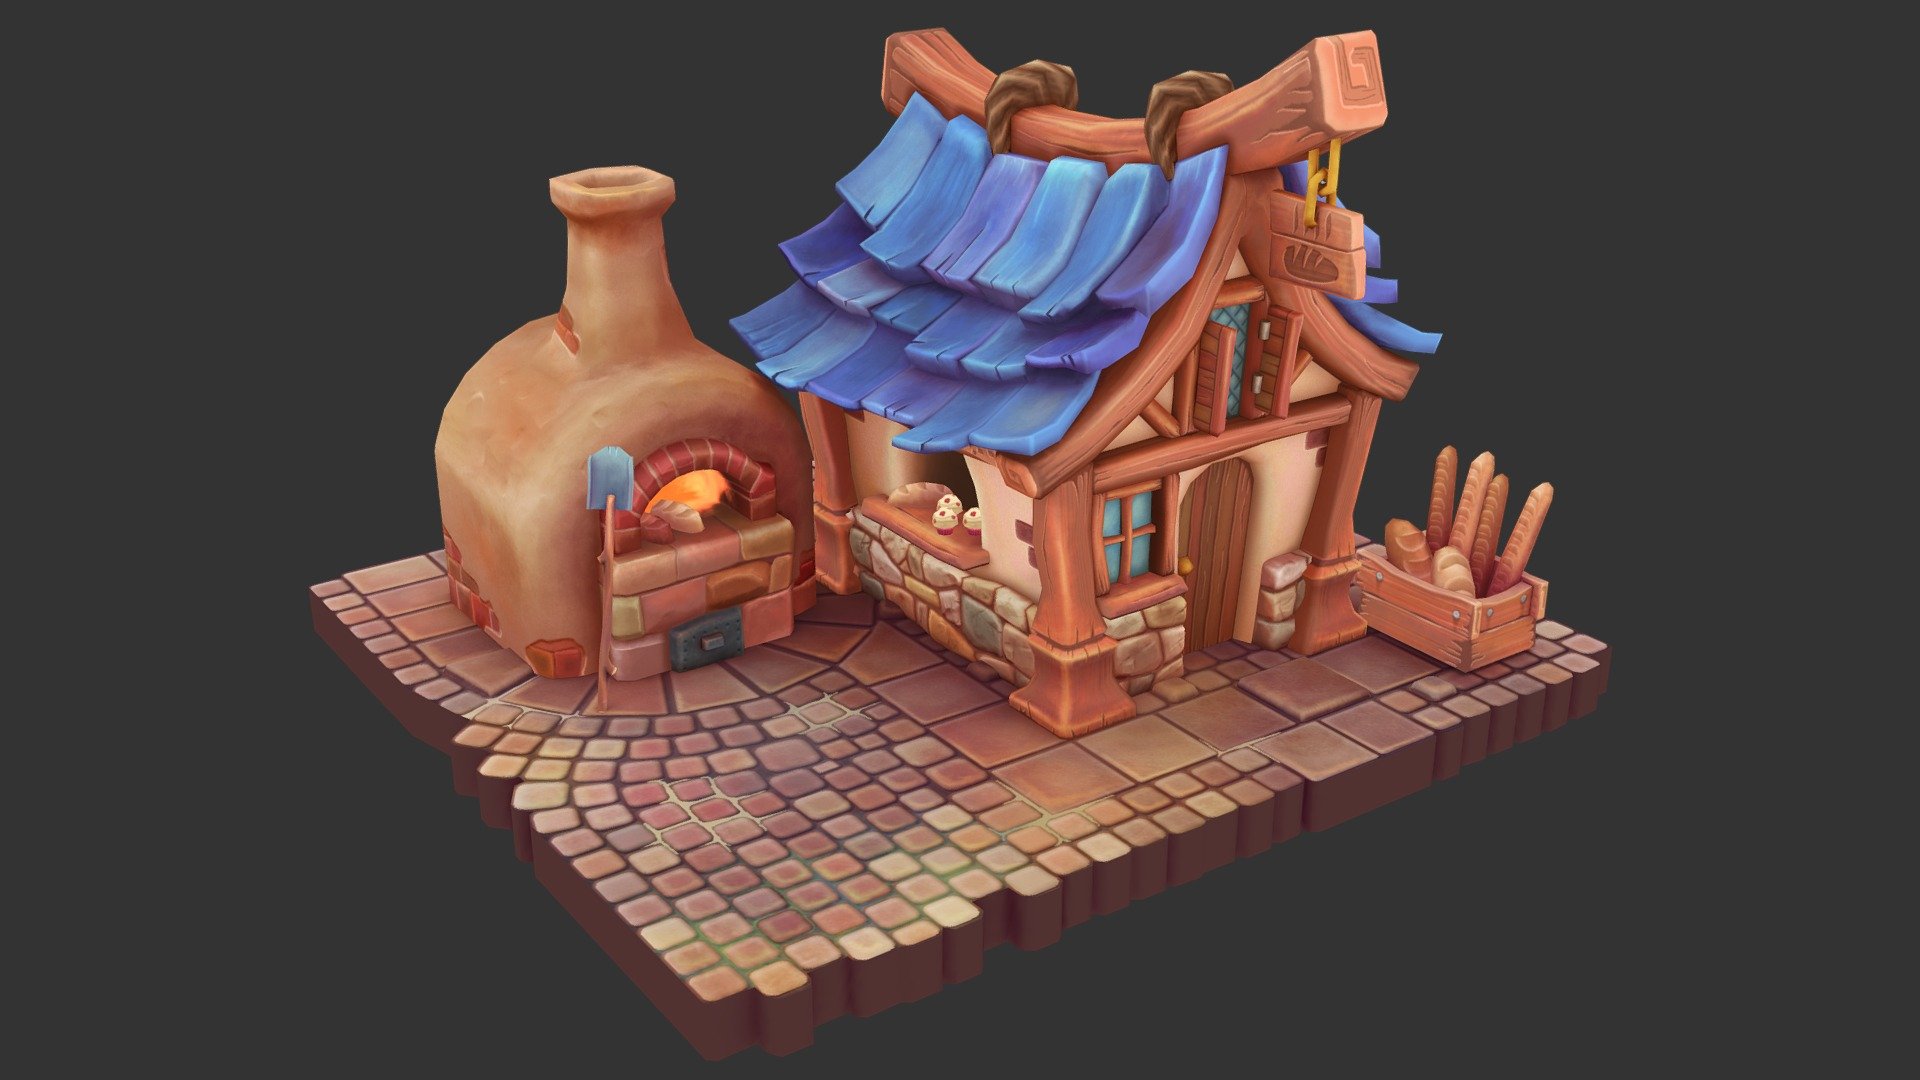 3498 Triangles + 1014 Triangles (Props set) + 394 Triangles (Ground)

2048px Atlas (Diffuse and emissive) + 1024px Atlas (Props set) + 1024px Ground texture - Bread Kiln and Bakery - 3D model by mattwells3d 3d model